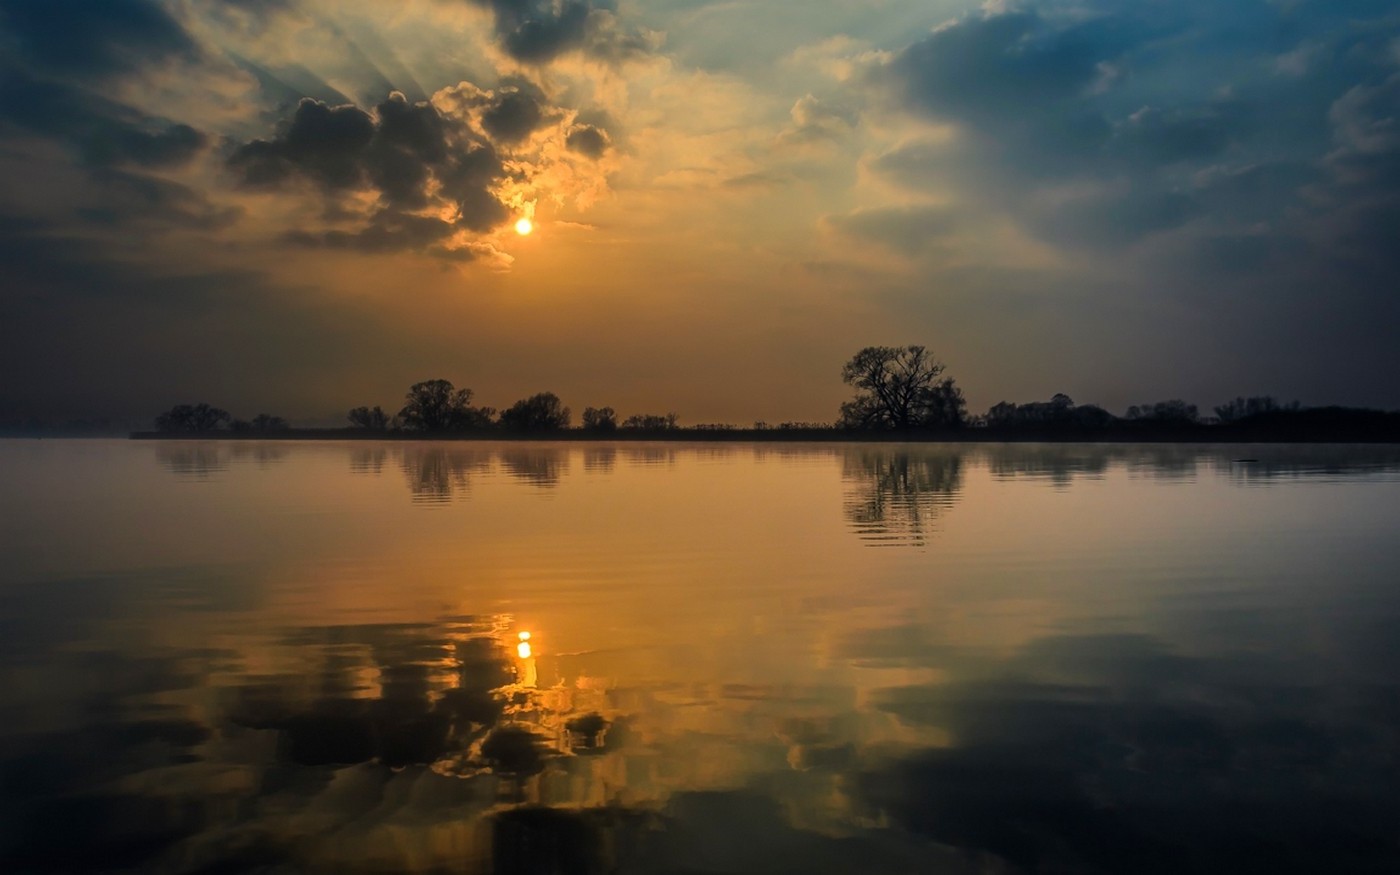 nature, Landscape, Calm, Clouds, Sunset, Lake, Reflection, Trees, Water